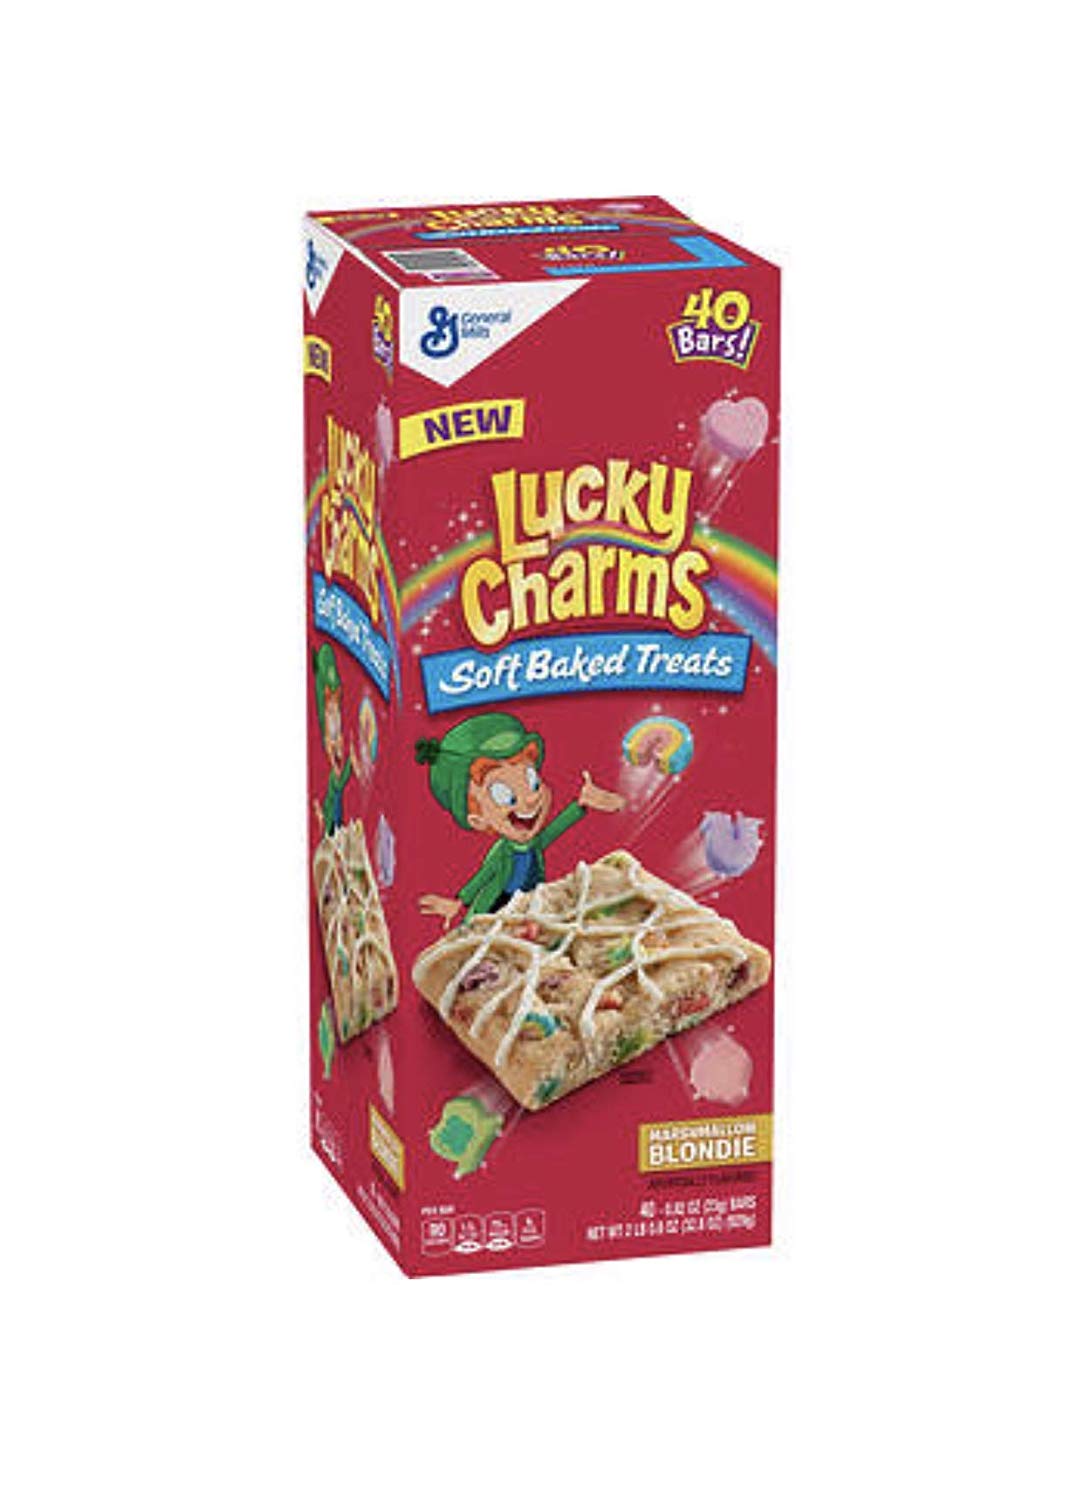 Lucky Charms New Marshmallow Blondie Soft Baked Treats 40 Bars